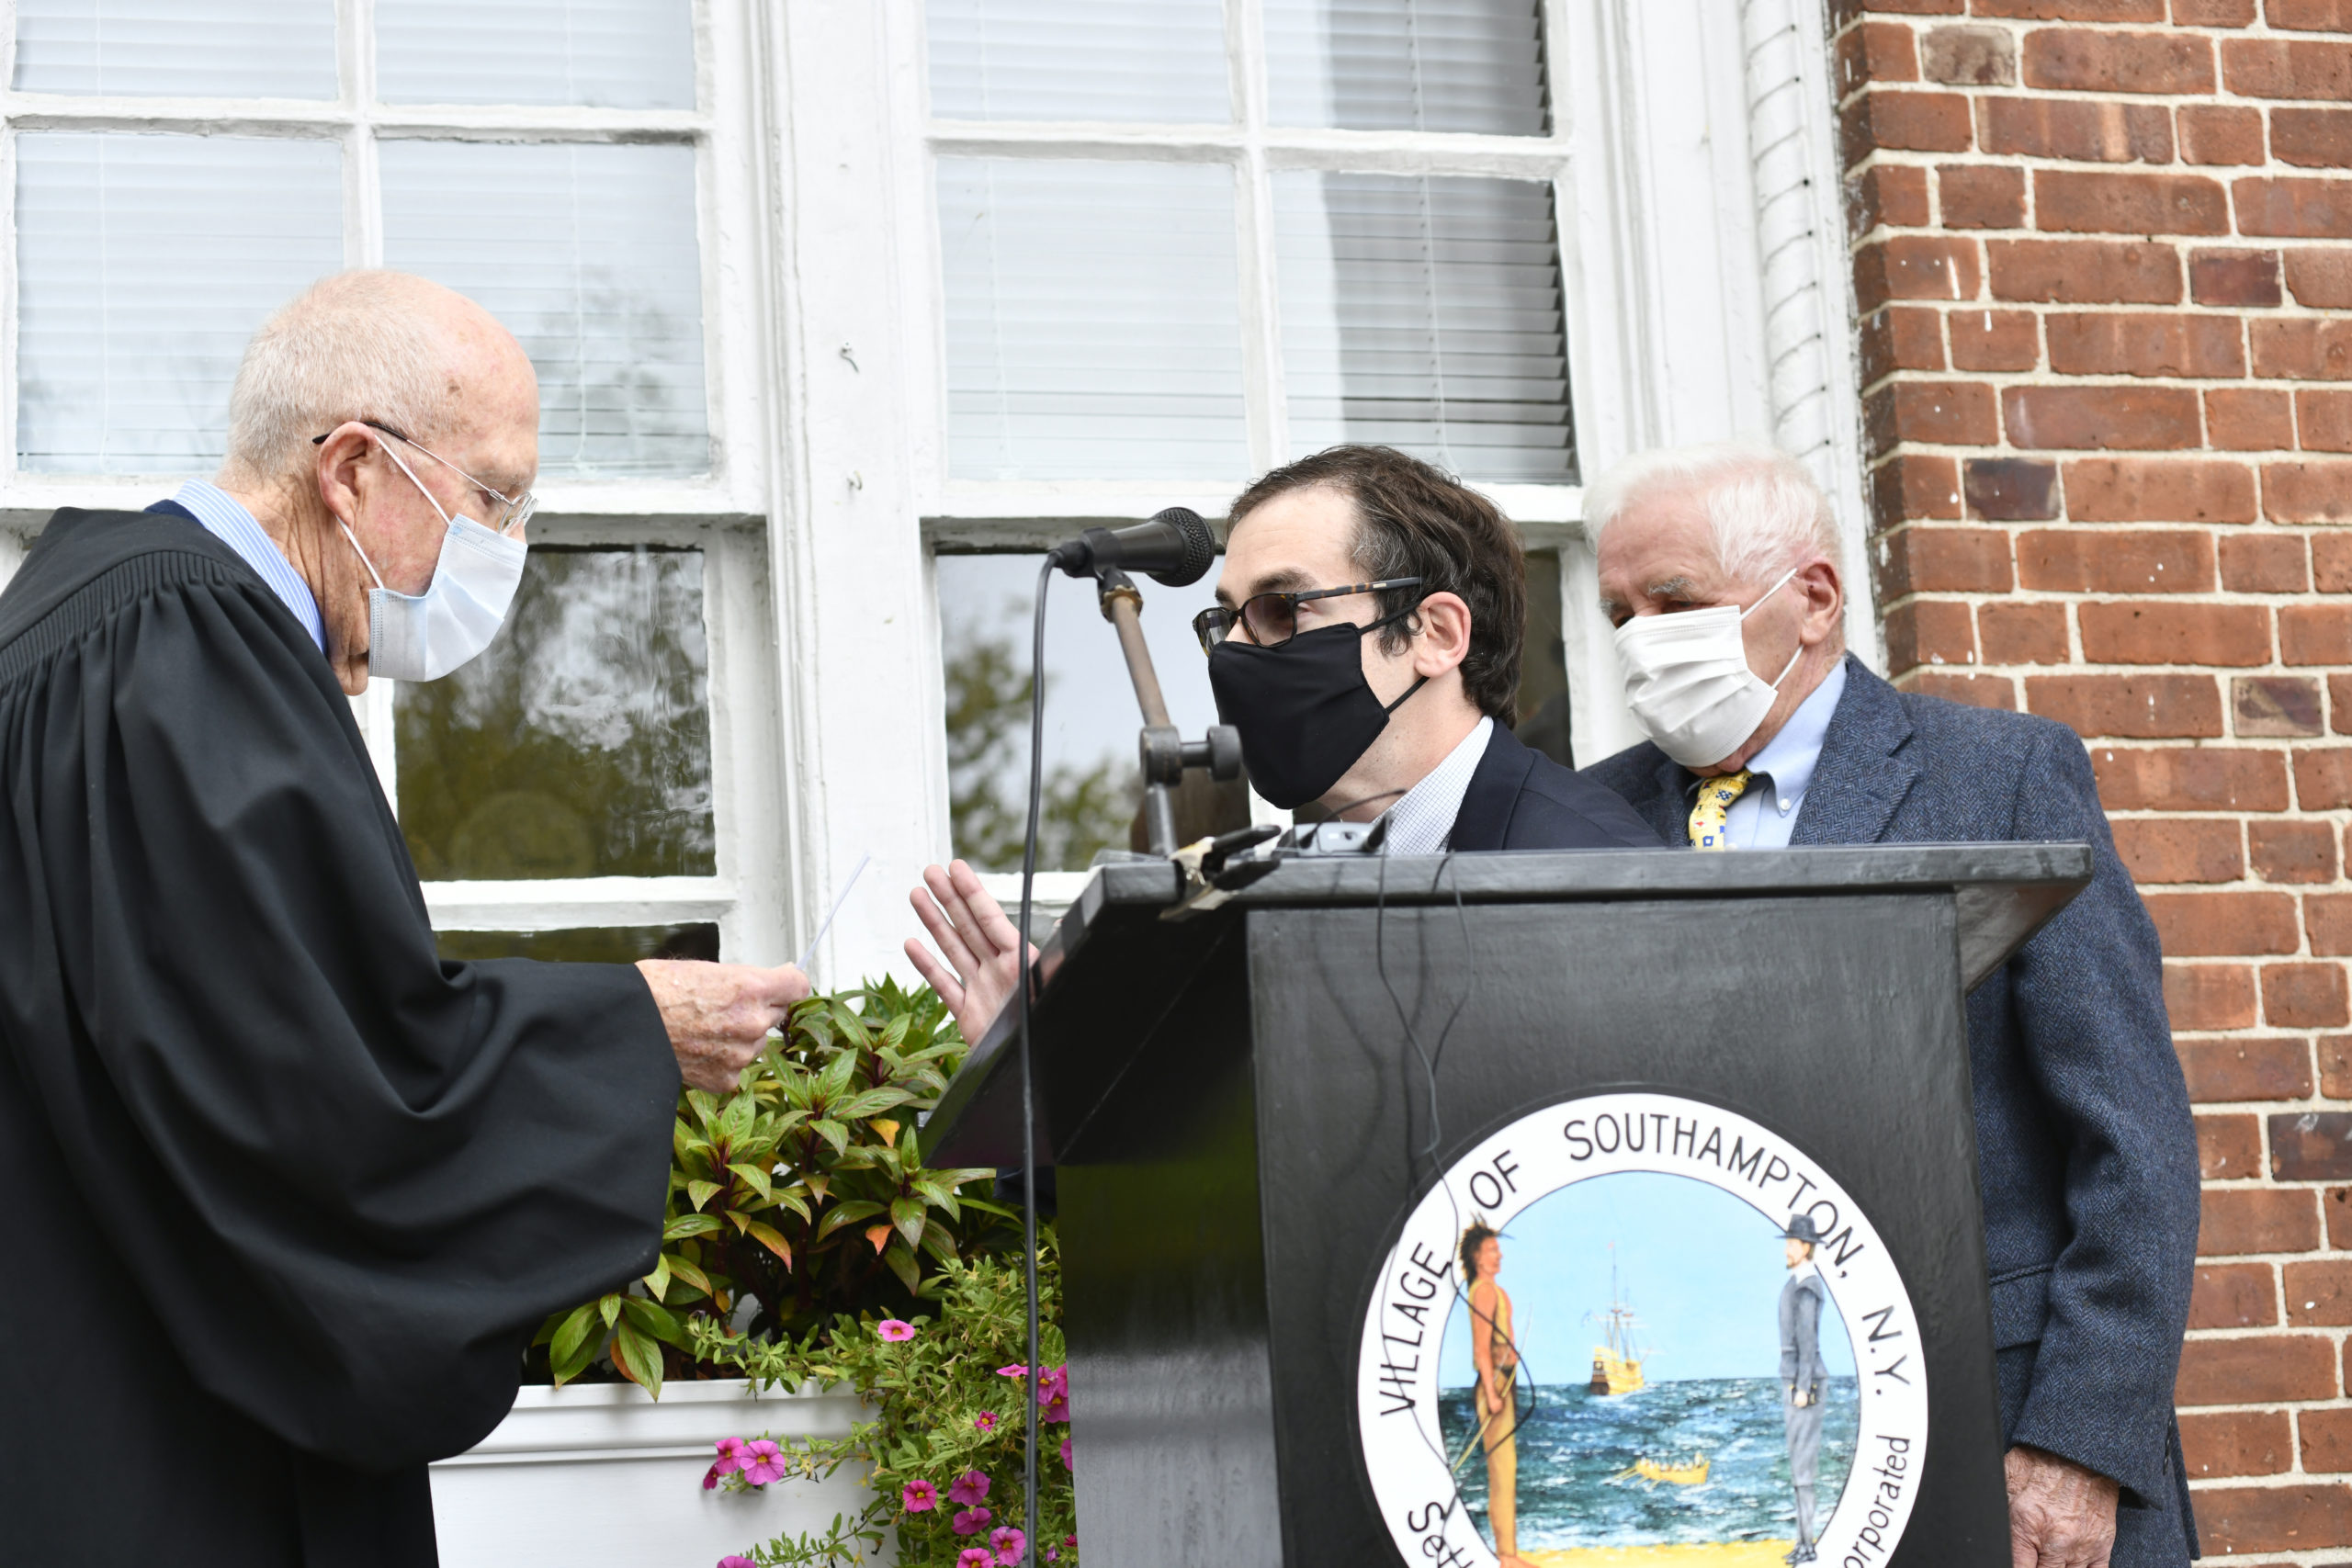 Joseph McLoughlin is sworn in on the steps of Southampton Villag Hall by Judge Michael Solomon while his father, former village trusteeJoseph McLoughlin looks on.  DANA SHAW